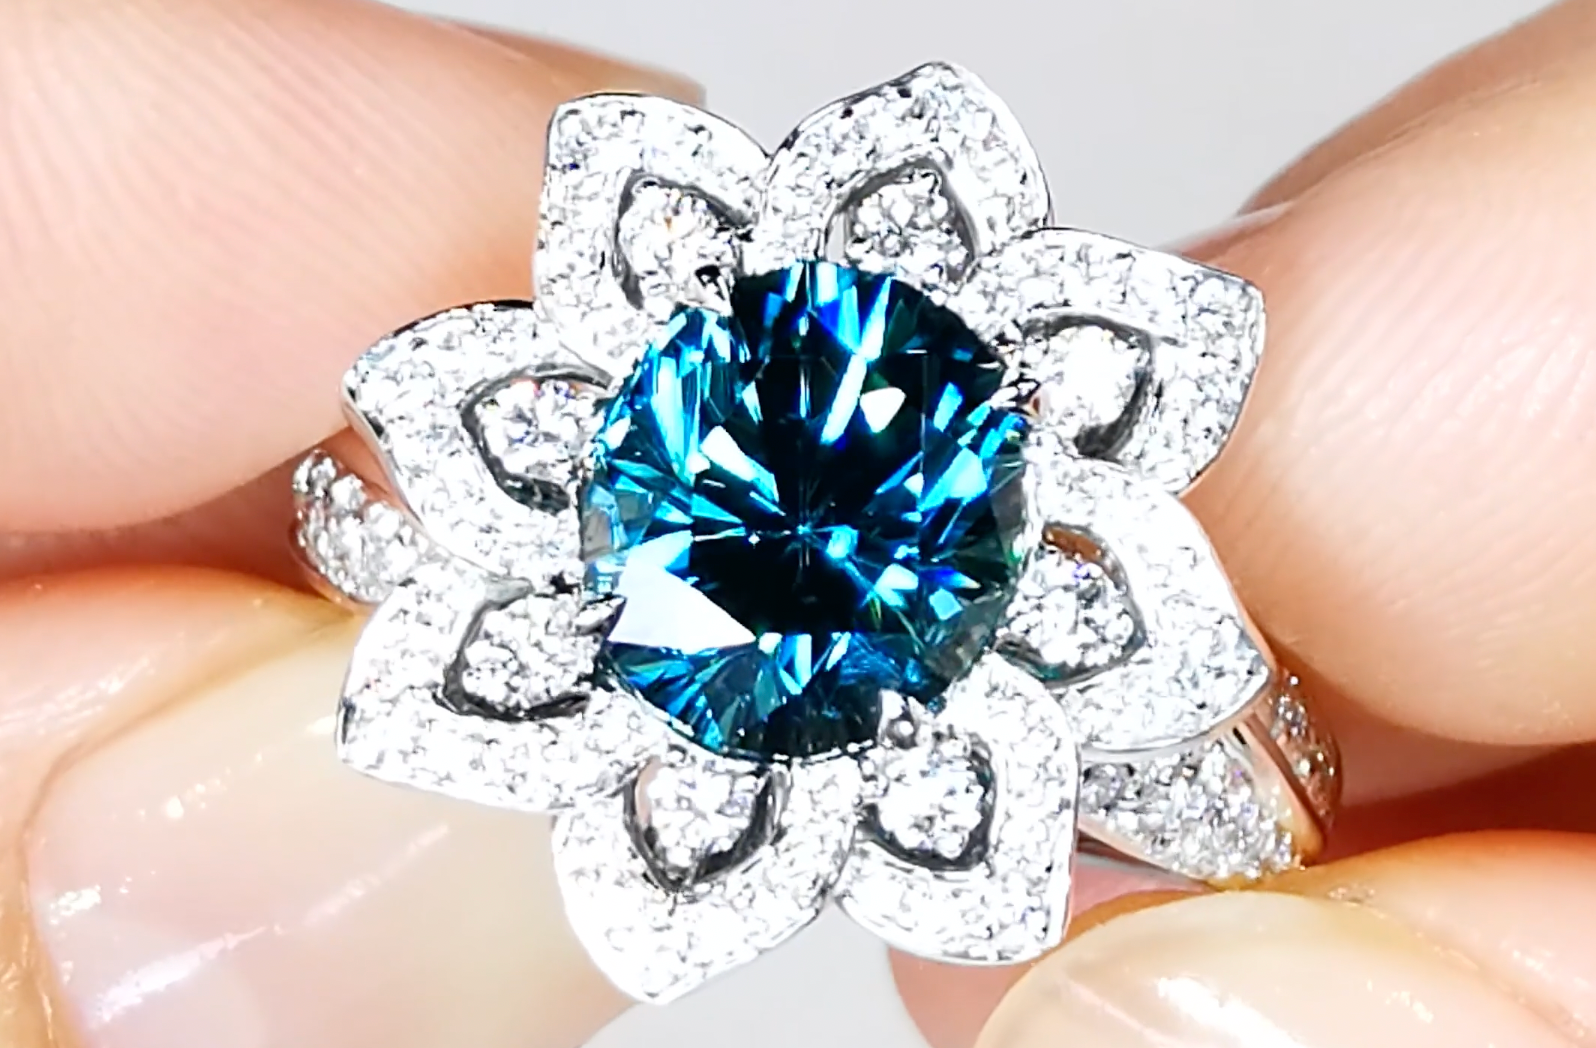 5.17ct Blue Zircon Ring with D Flawless Diamonds set in 18K White Gold